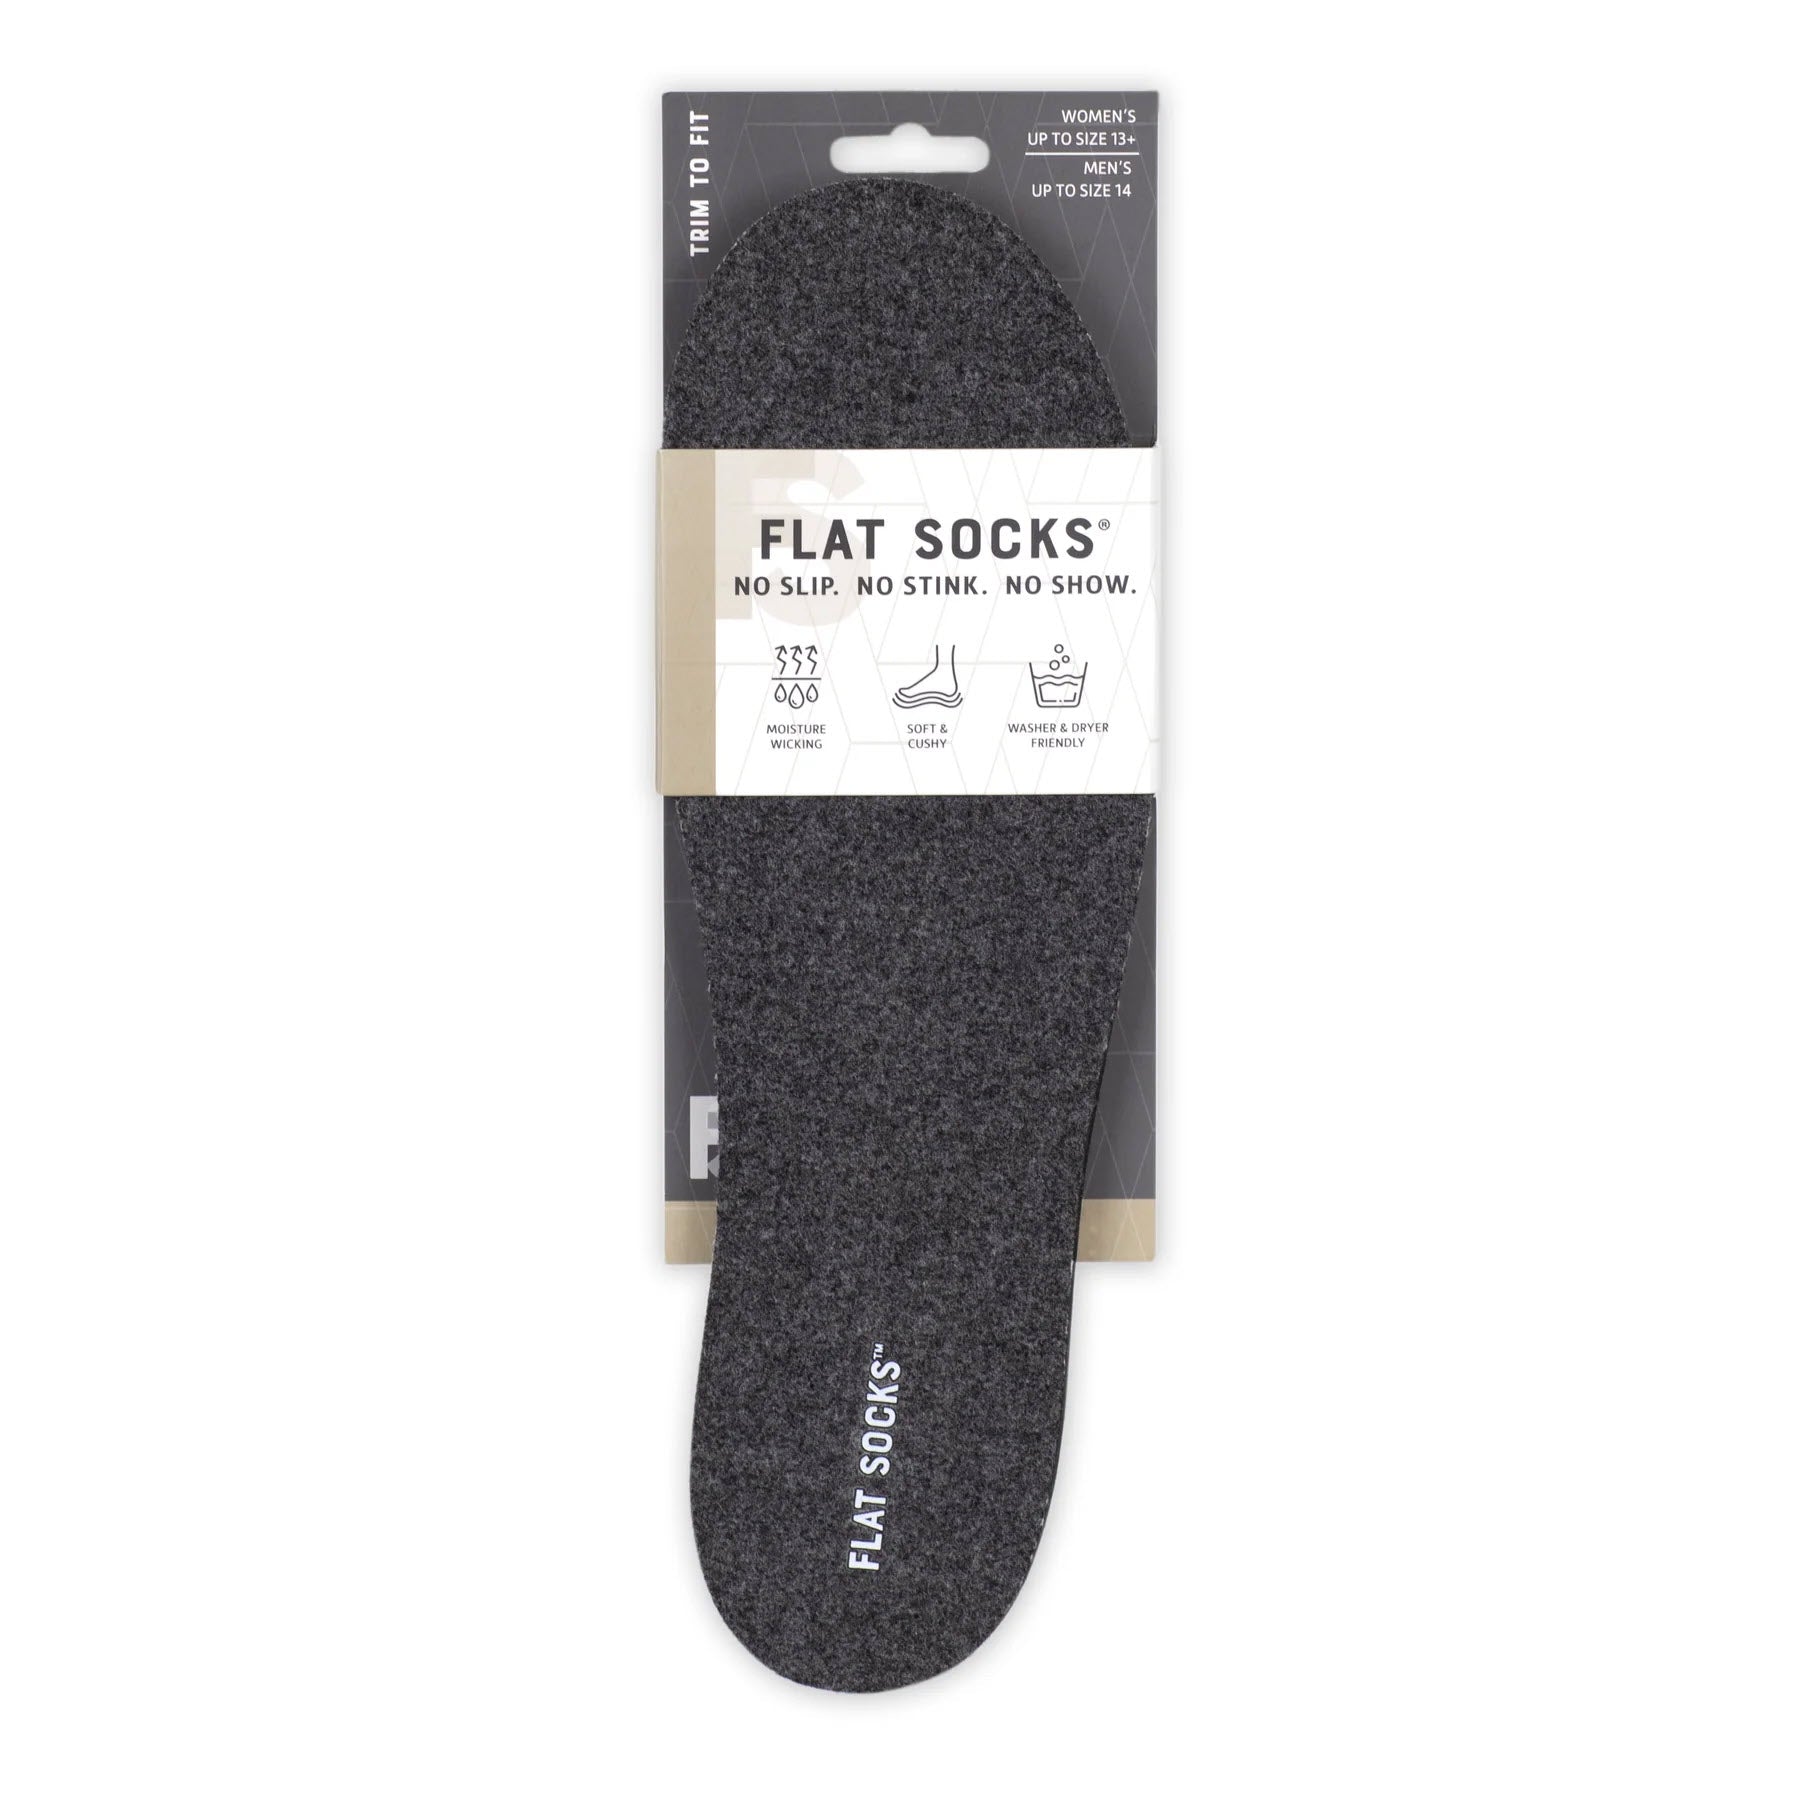 A pair of FLAT SOCKS DARK GRAY - MENS no-show socks displayed on a cardboard hanger, labeled "FLAT SOCKS" with text detailing features like "no slip, no stink, moisture-wicking.